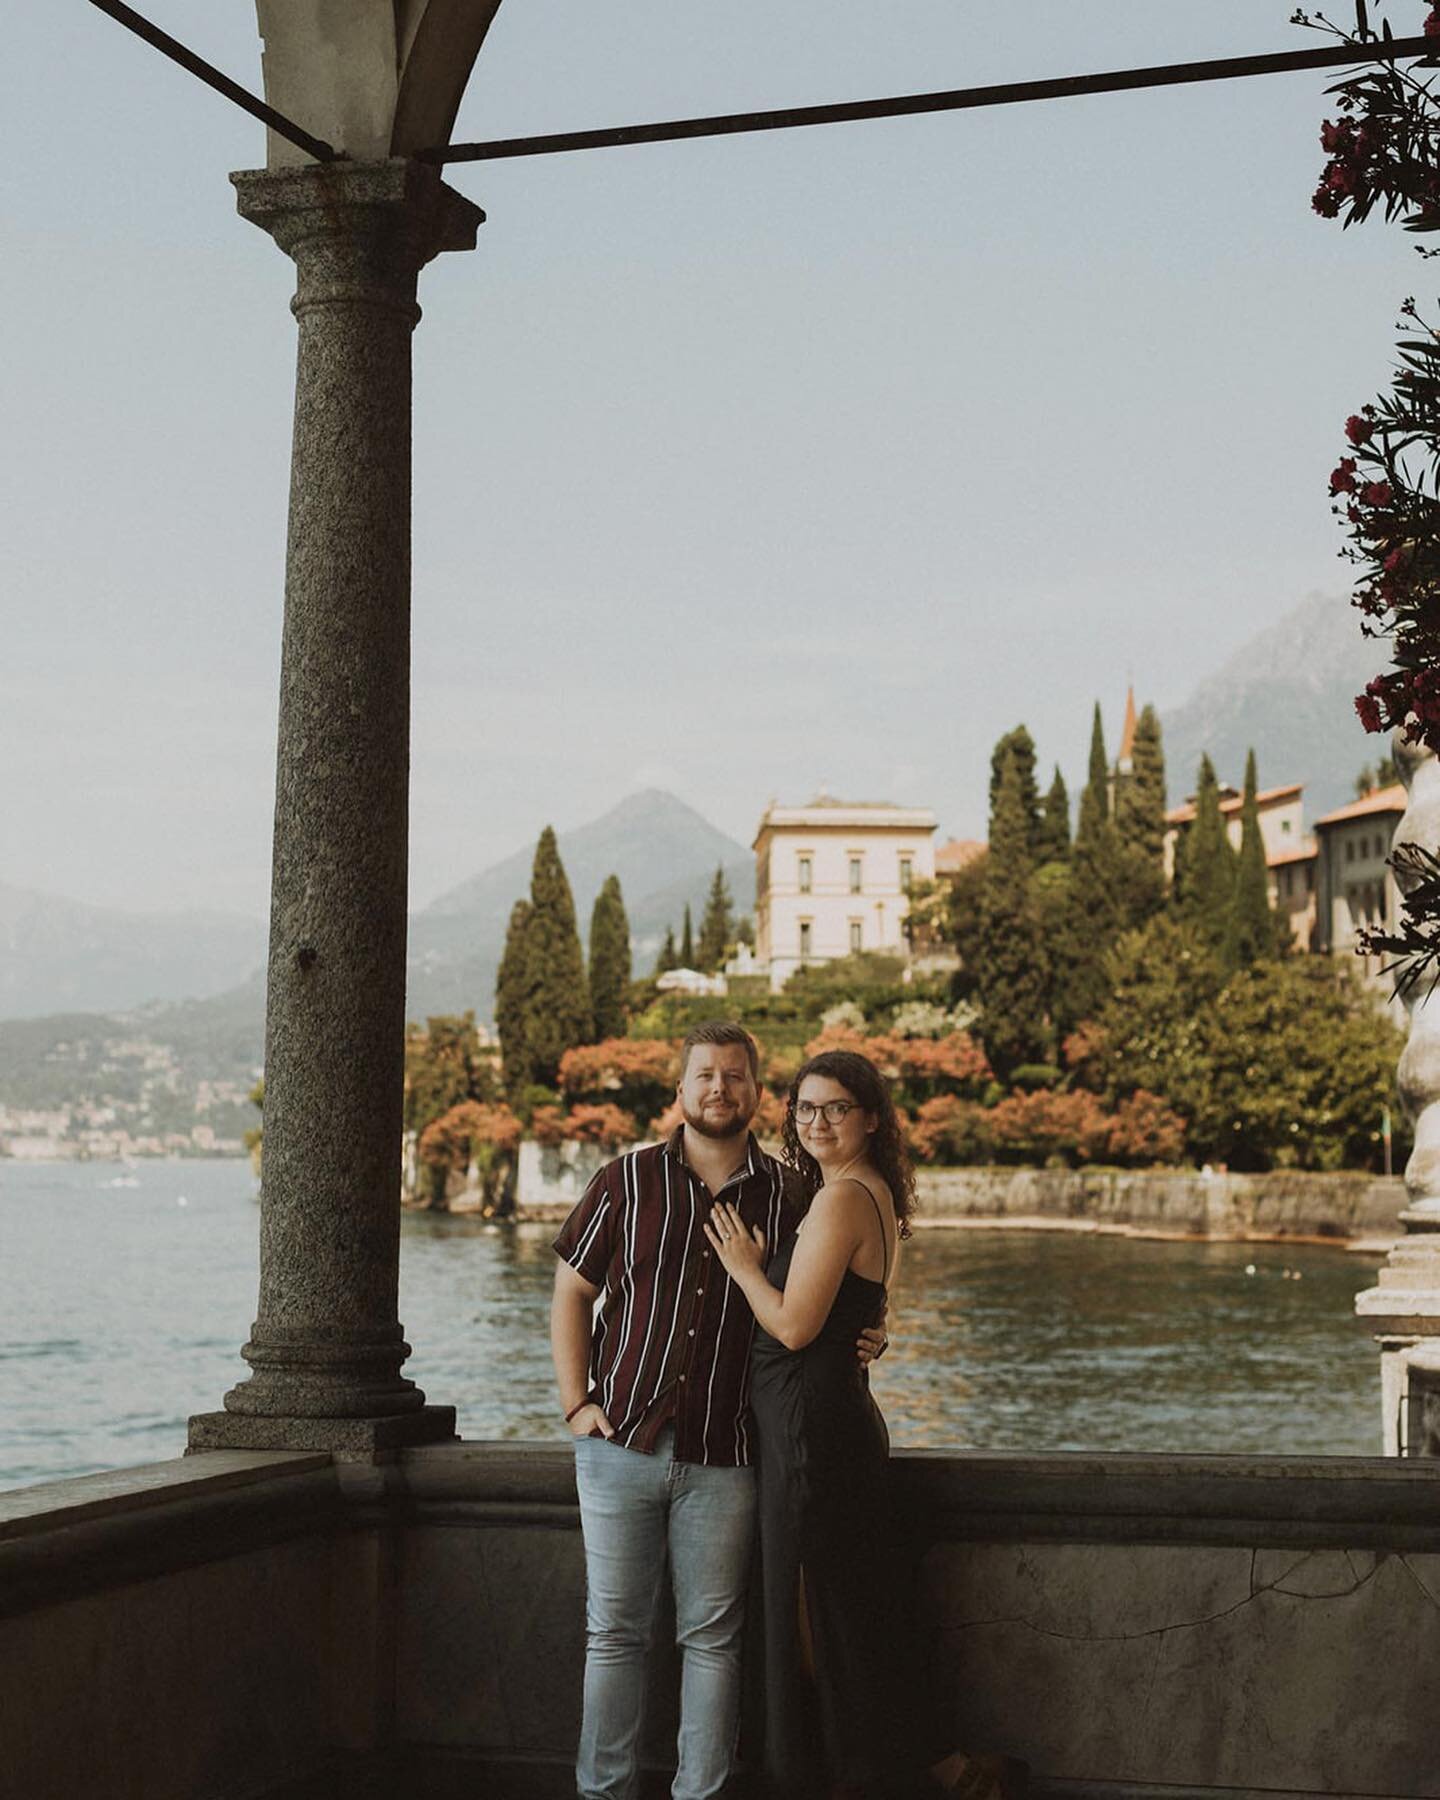 Calling all couples who want to elope in Lake Como 😩